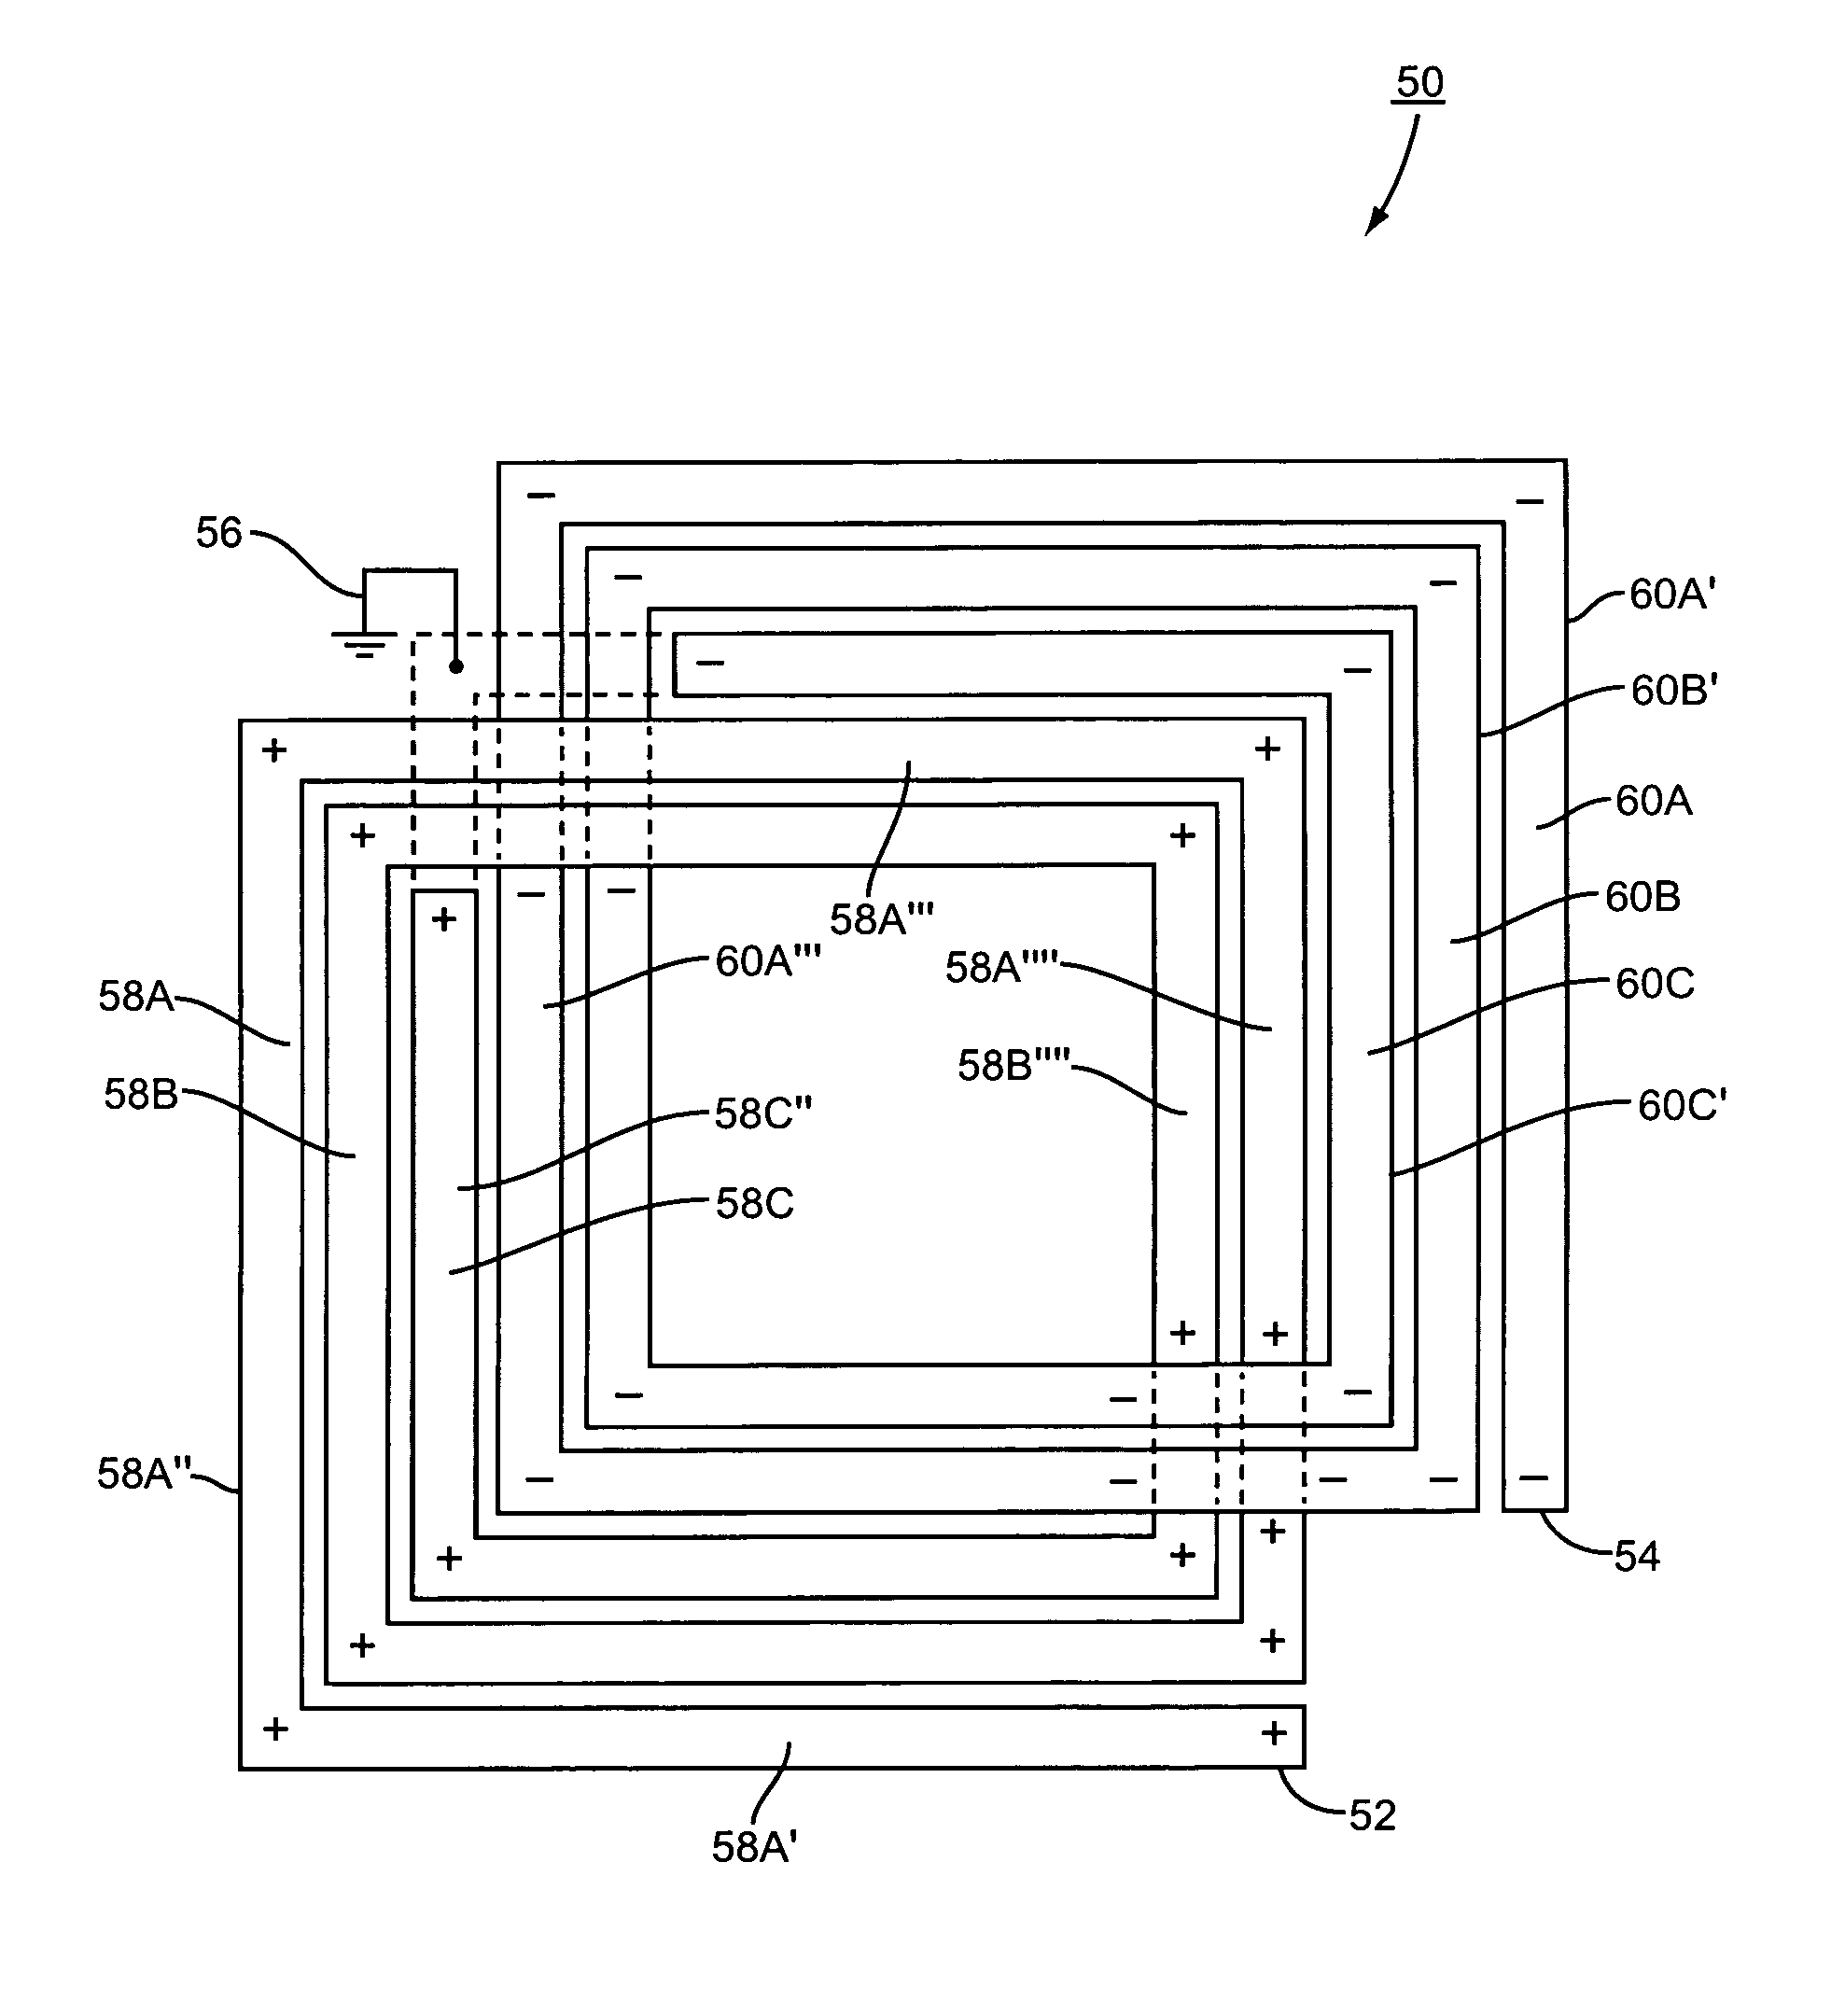 Method of constructing a differential inductor